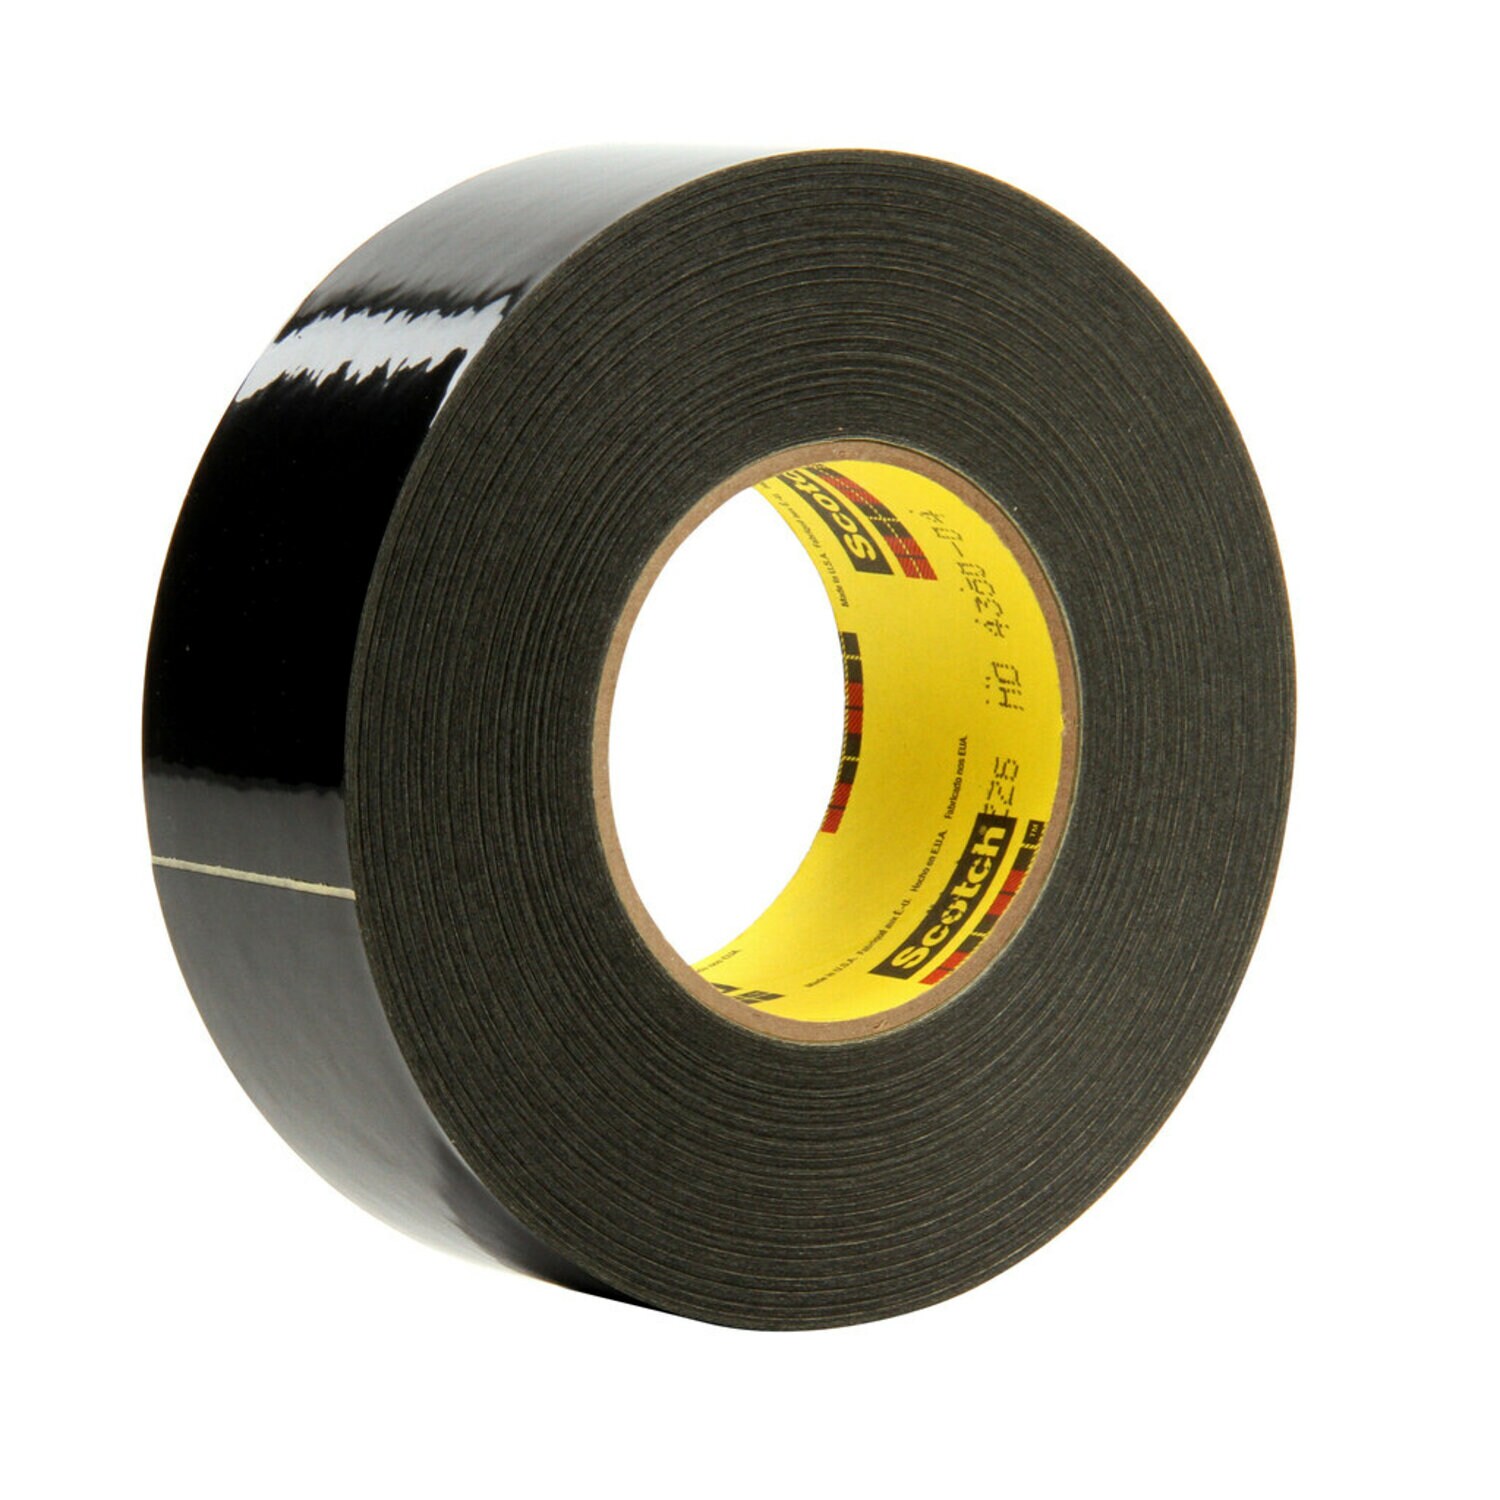 7100042803 - Scotch Solvent Resistant Masking Tape 226, Black, 1-1/2 in x 60 yd,
10.6 mil, 24/Case